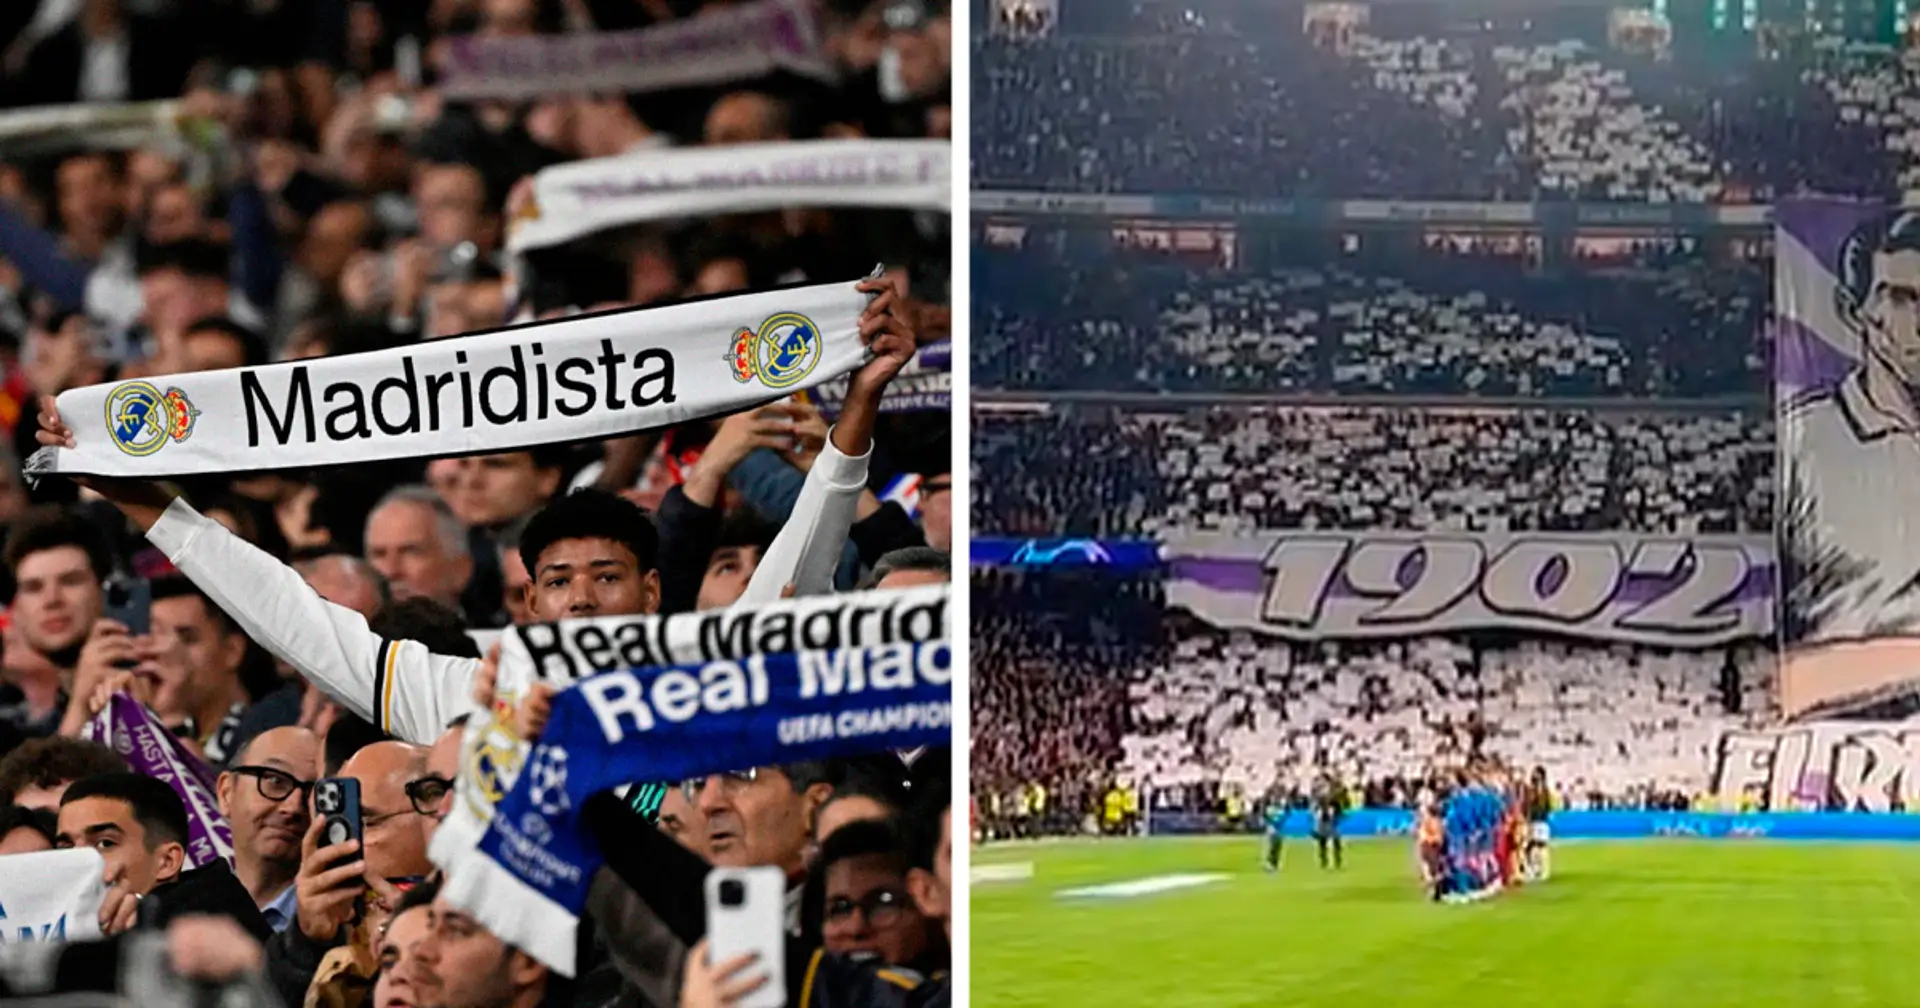 Real Madrid fans unveil giant banner for club's 122nd birthday - featuring 2 legendary players